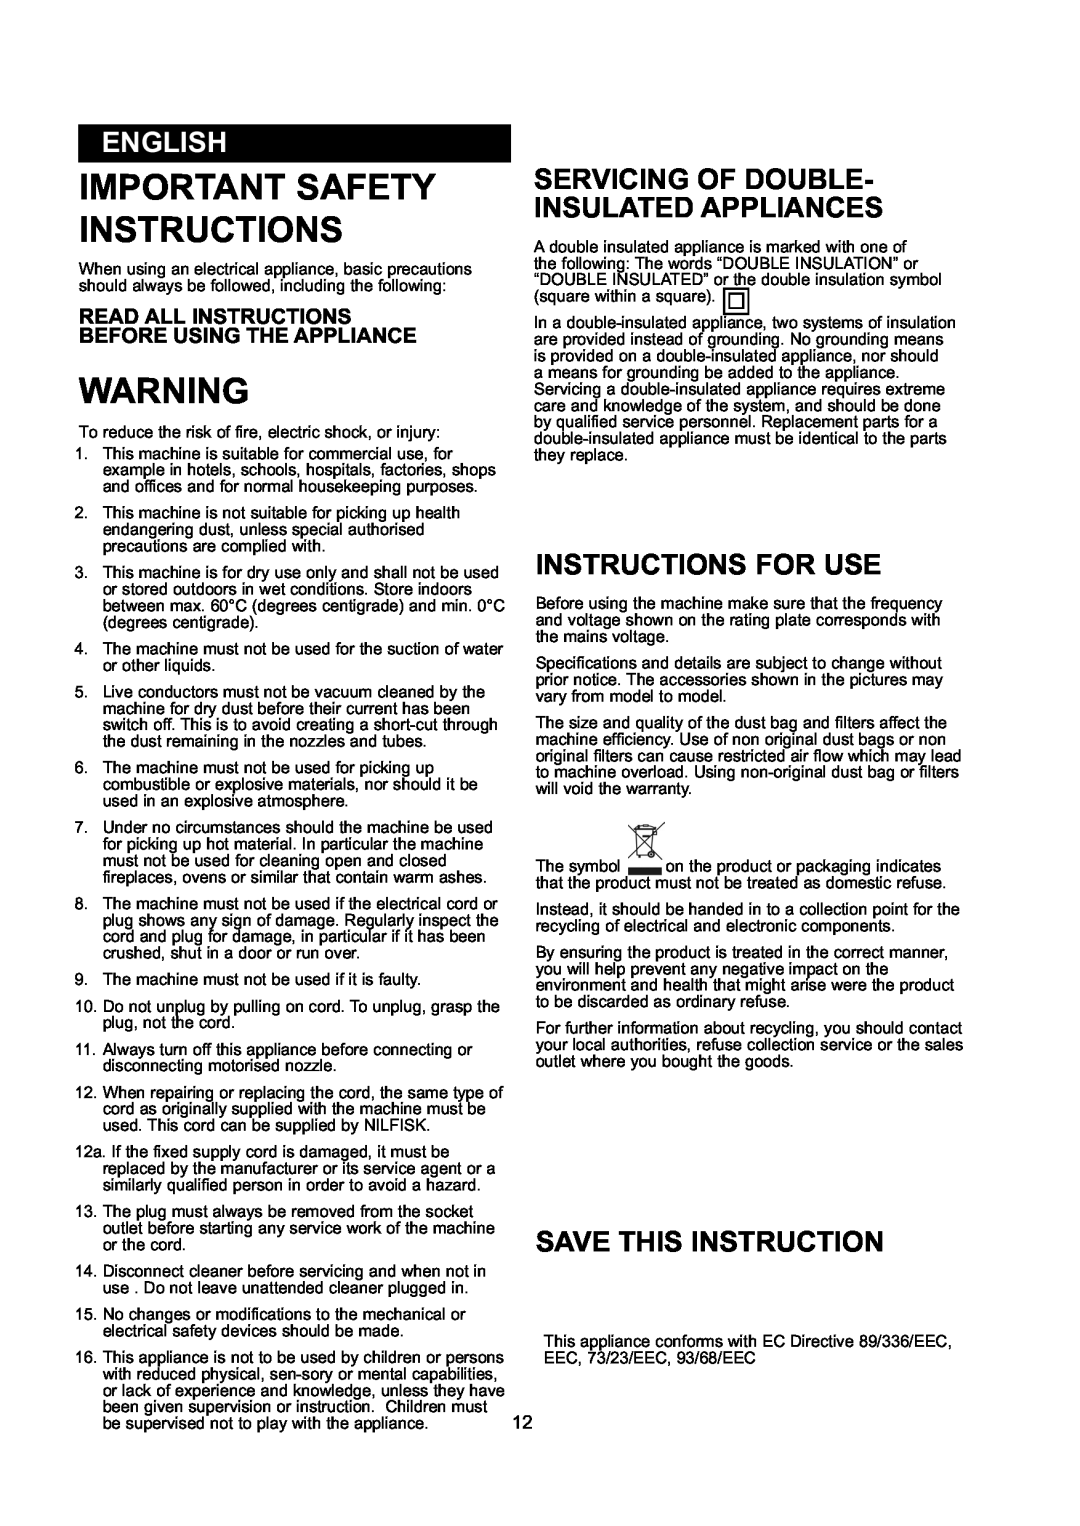 Nilfisk-ALTO GD 10 Back English, Servicing Of Double- Insulated Appliances, Instructions For Use, Save This Instruction 